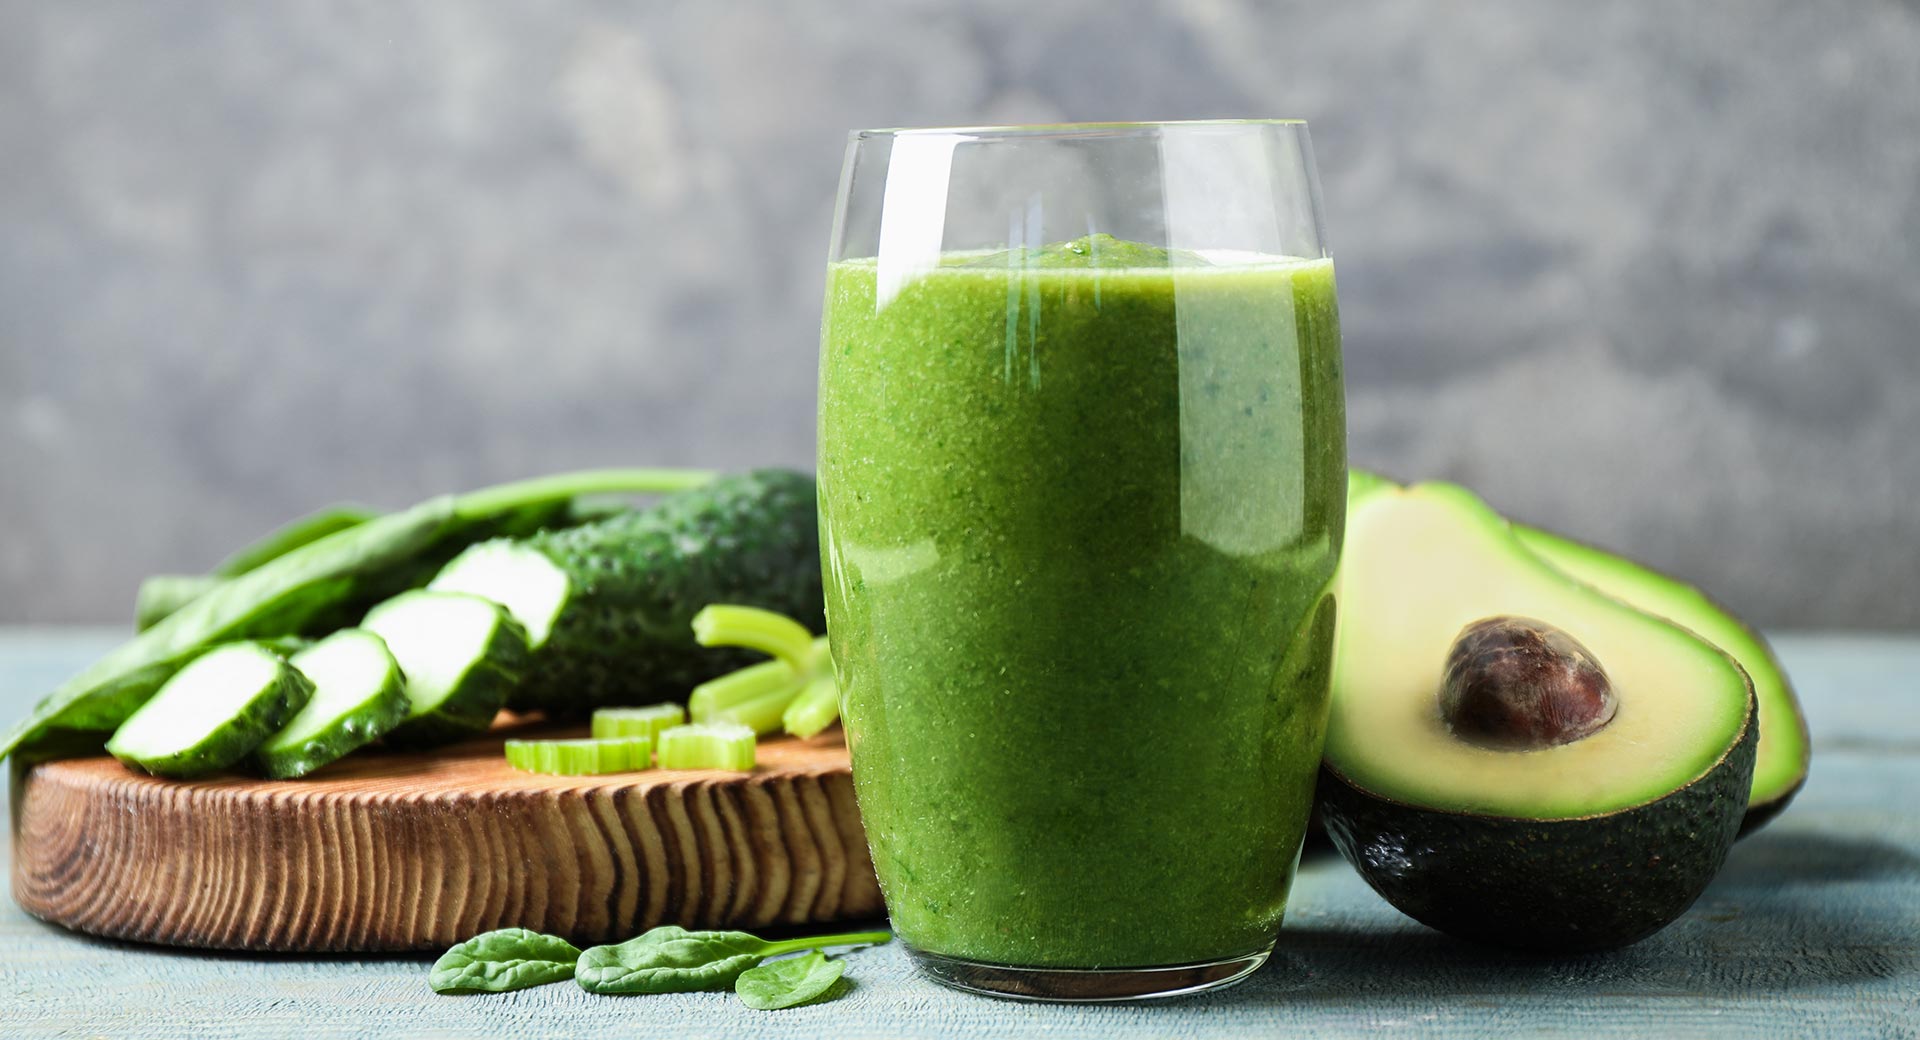 green smoothie in glass, cut avocado and cucumbers next to it